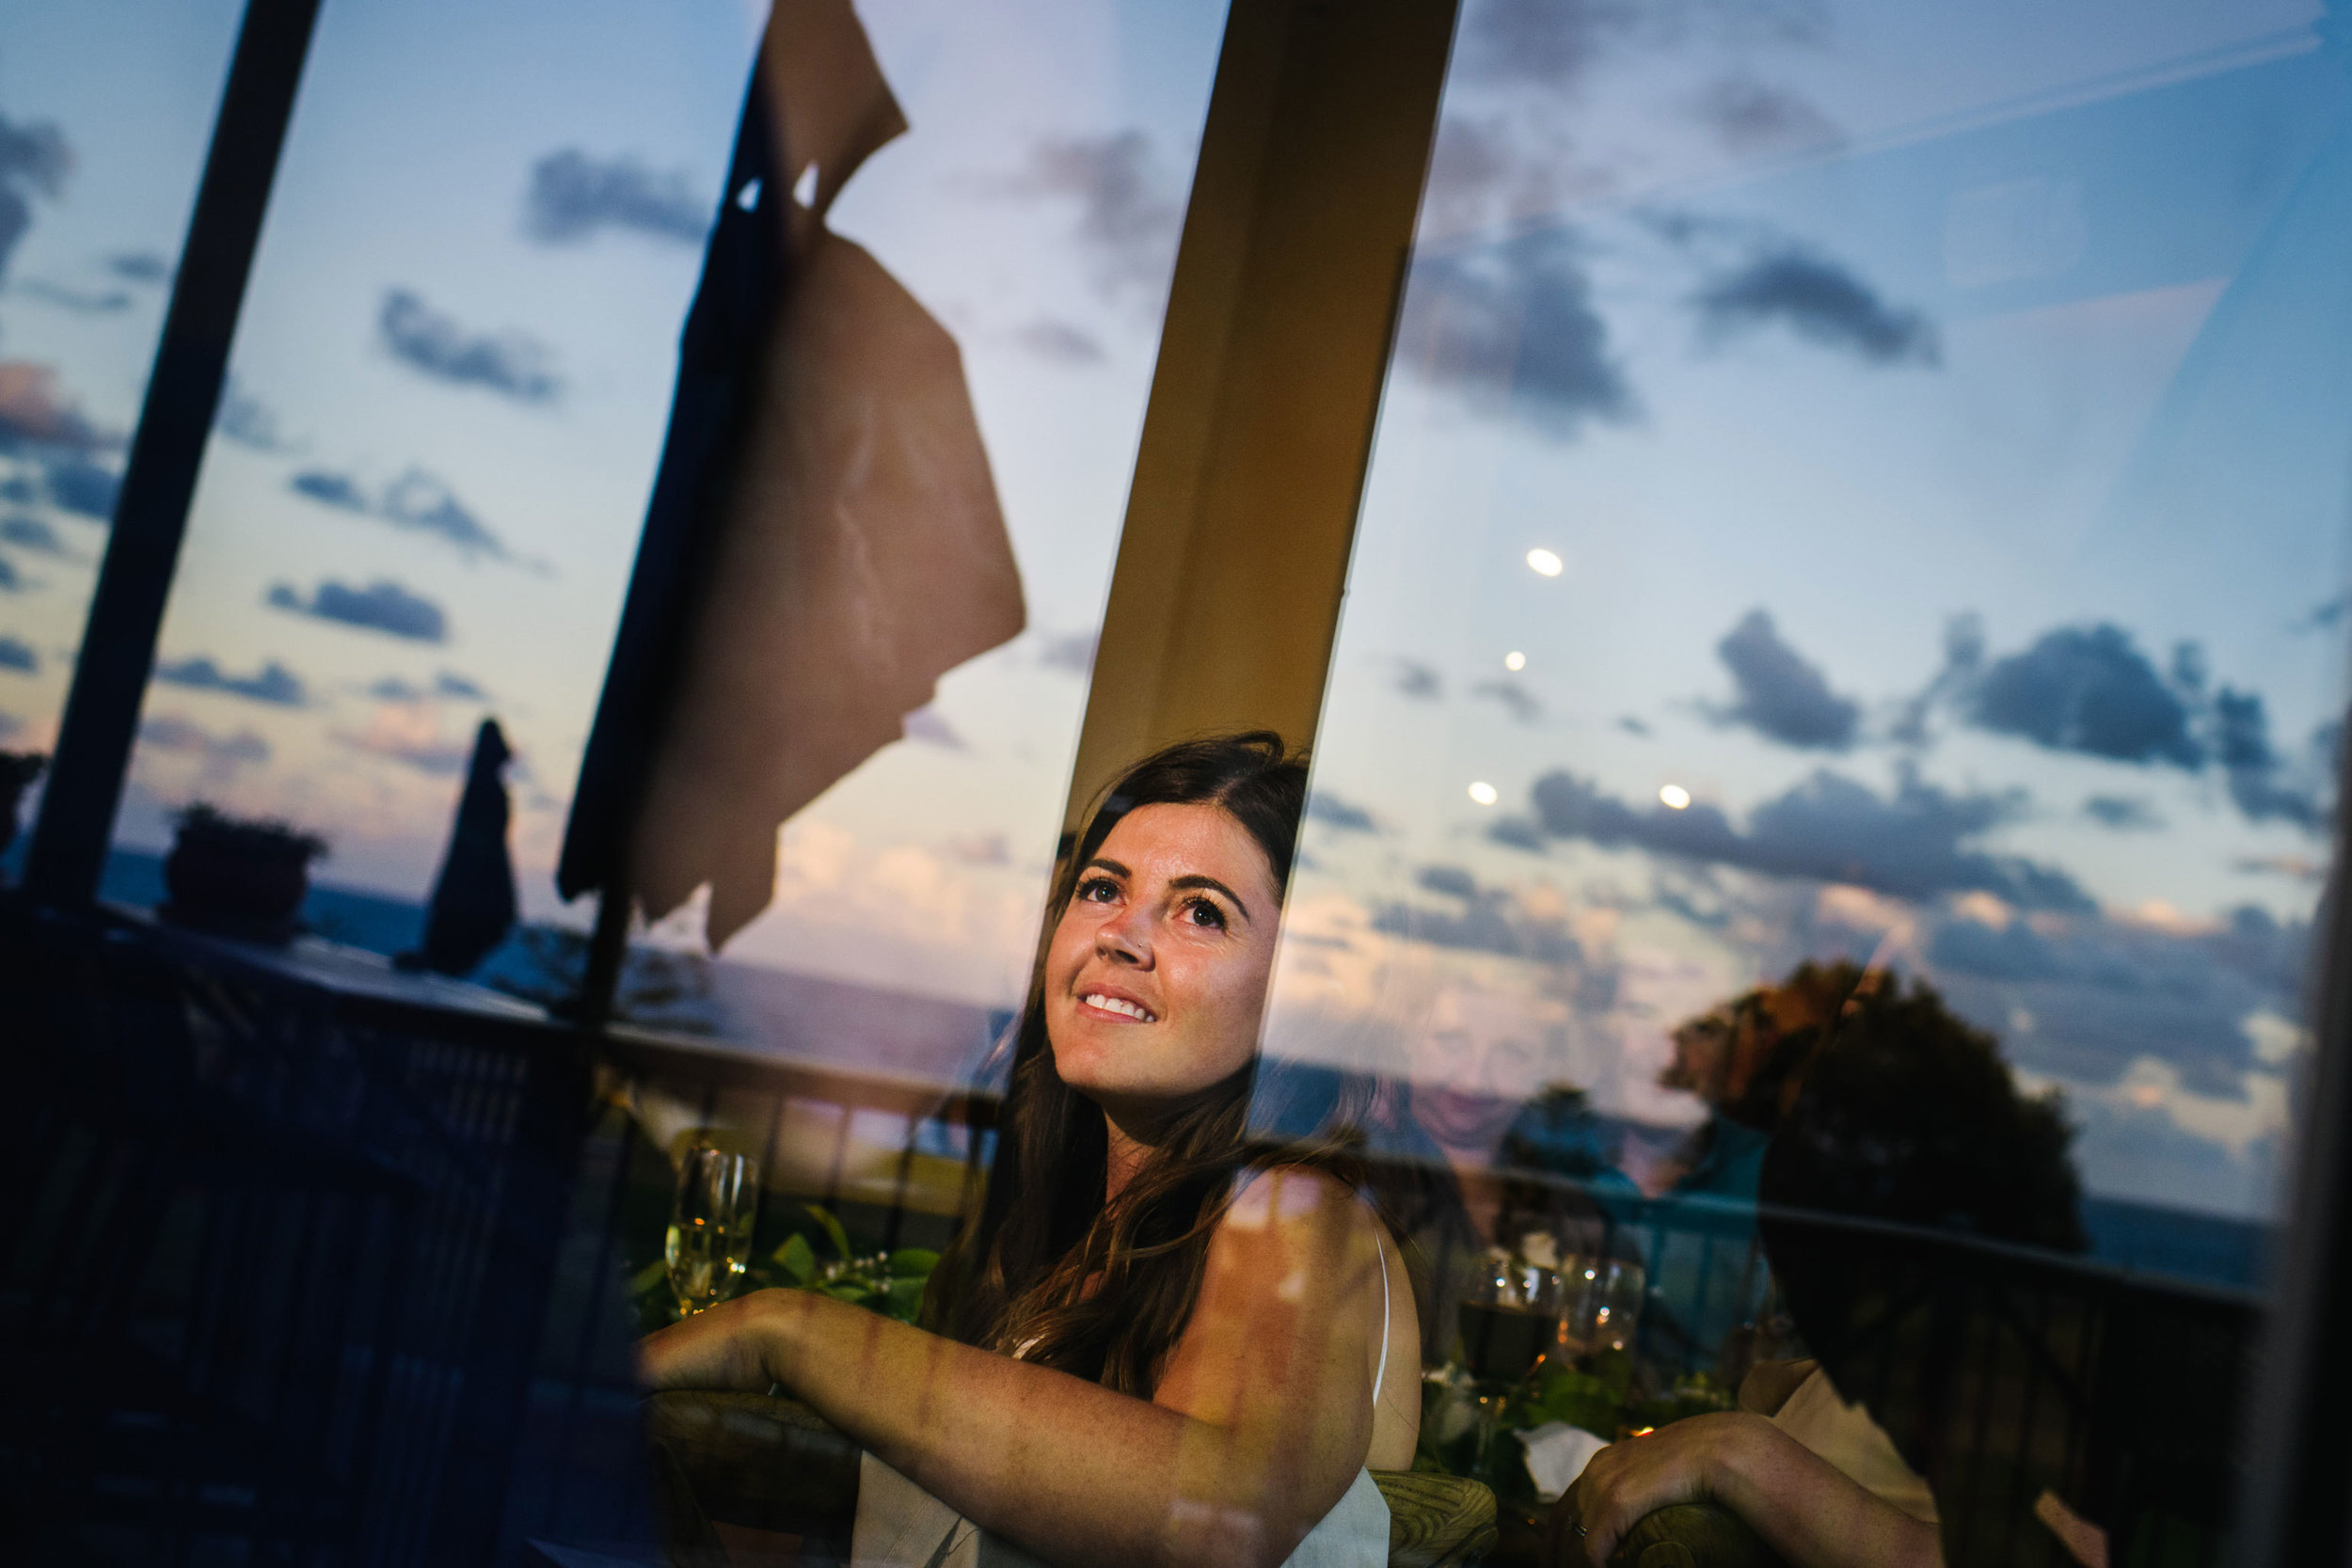 Bride smiling with the evening sky reflected in windows